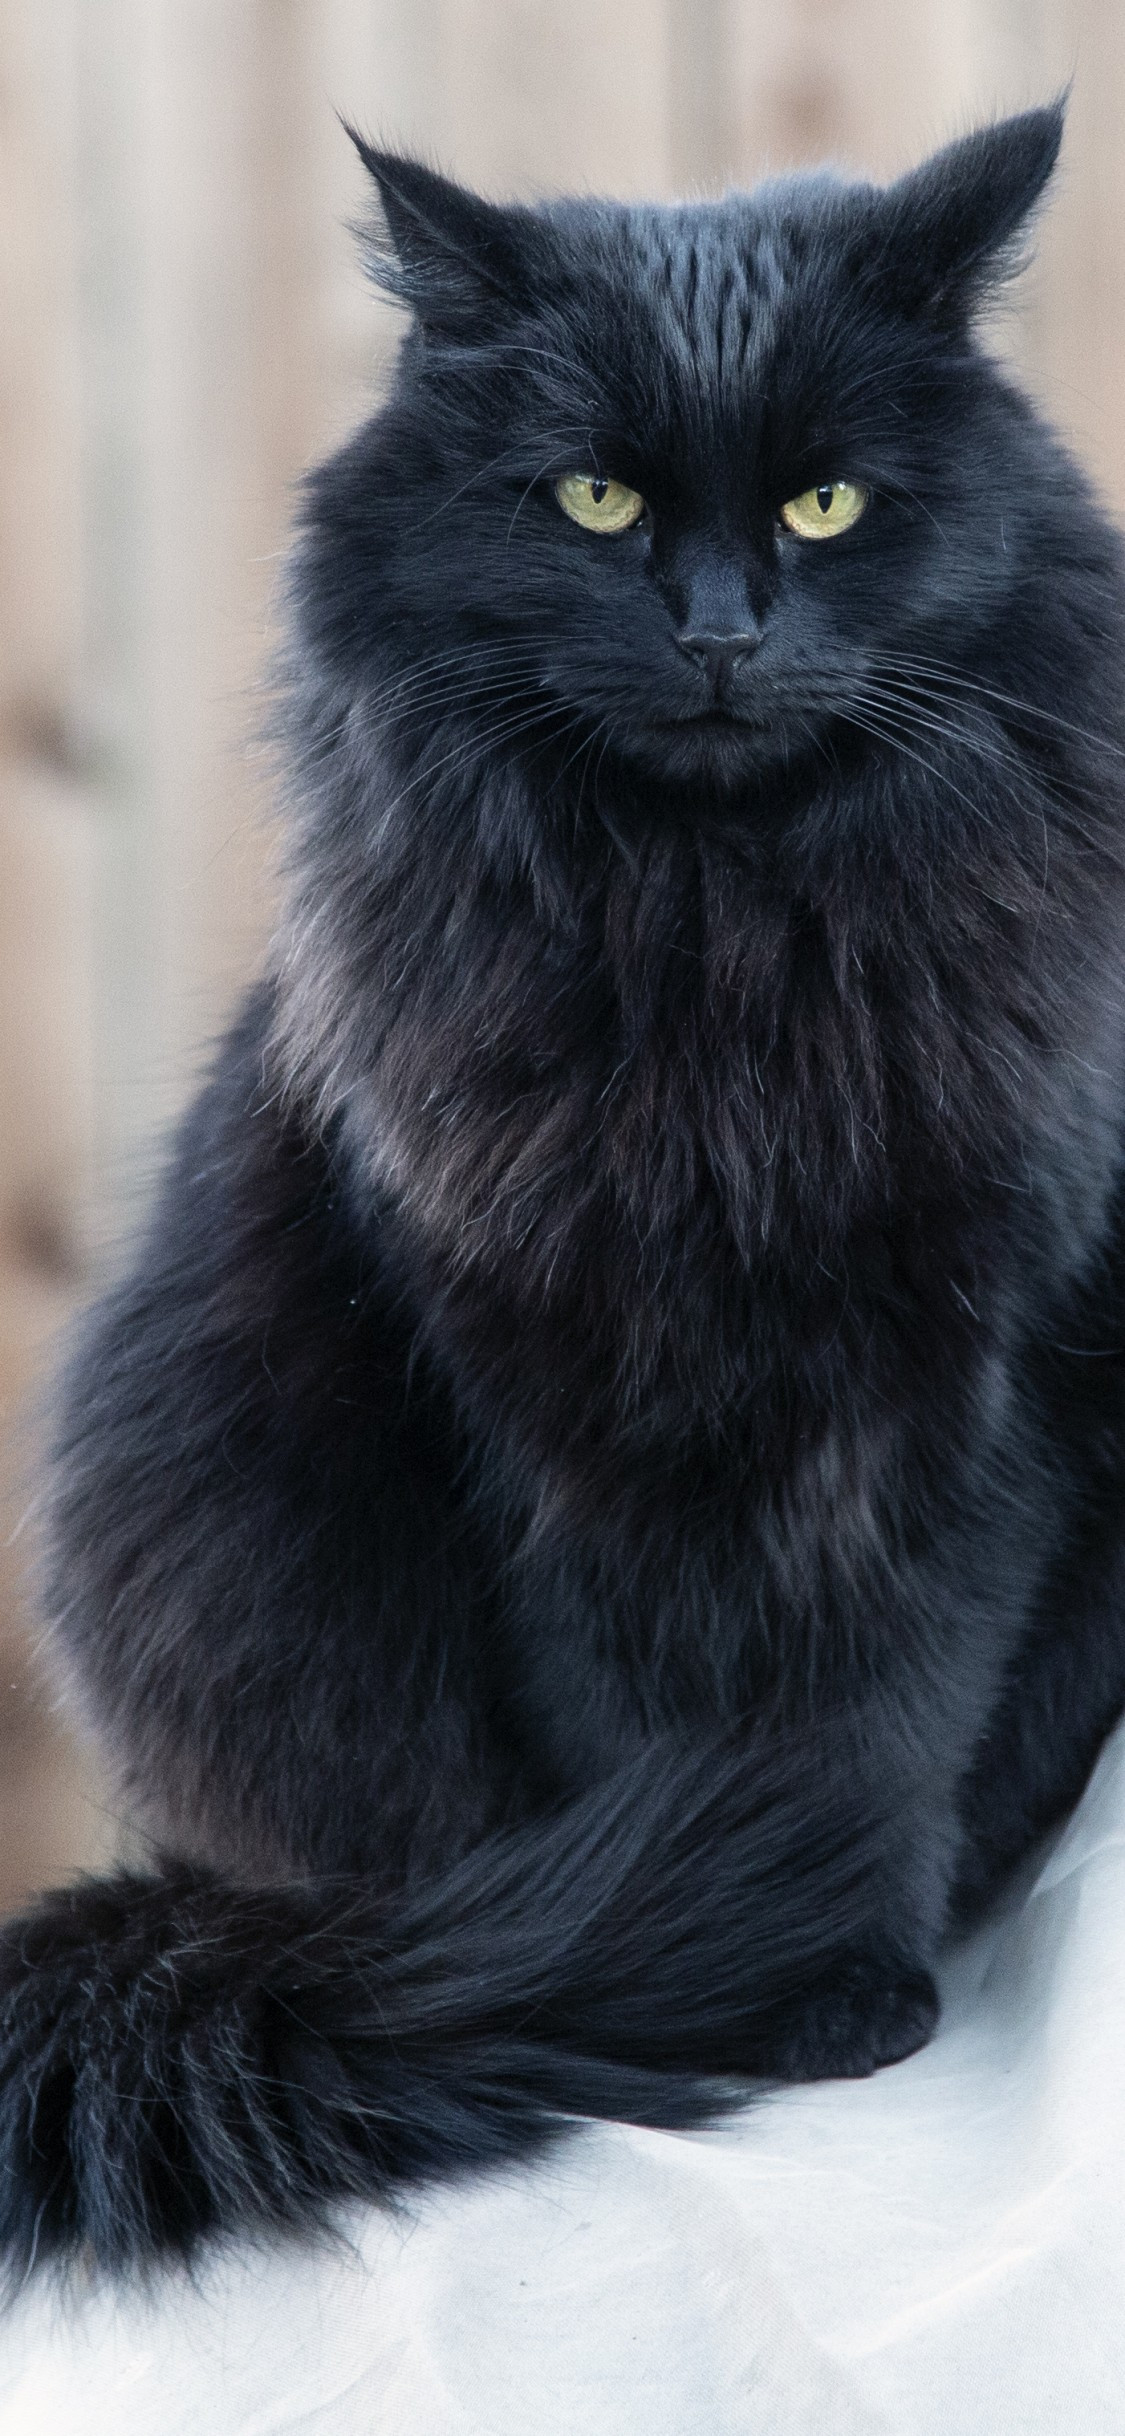 Download 1125x2436 Black Fluffy Cat, Stare, Angry Expression Wallpaper for iPhone 11 Pro & X